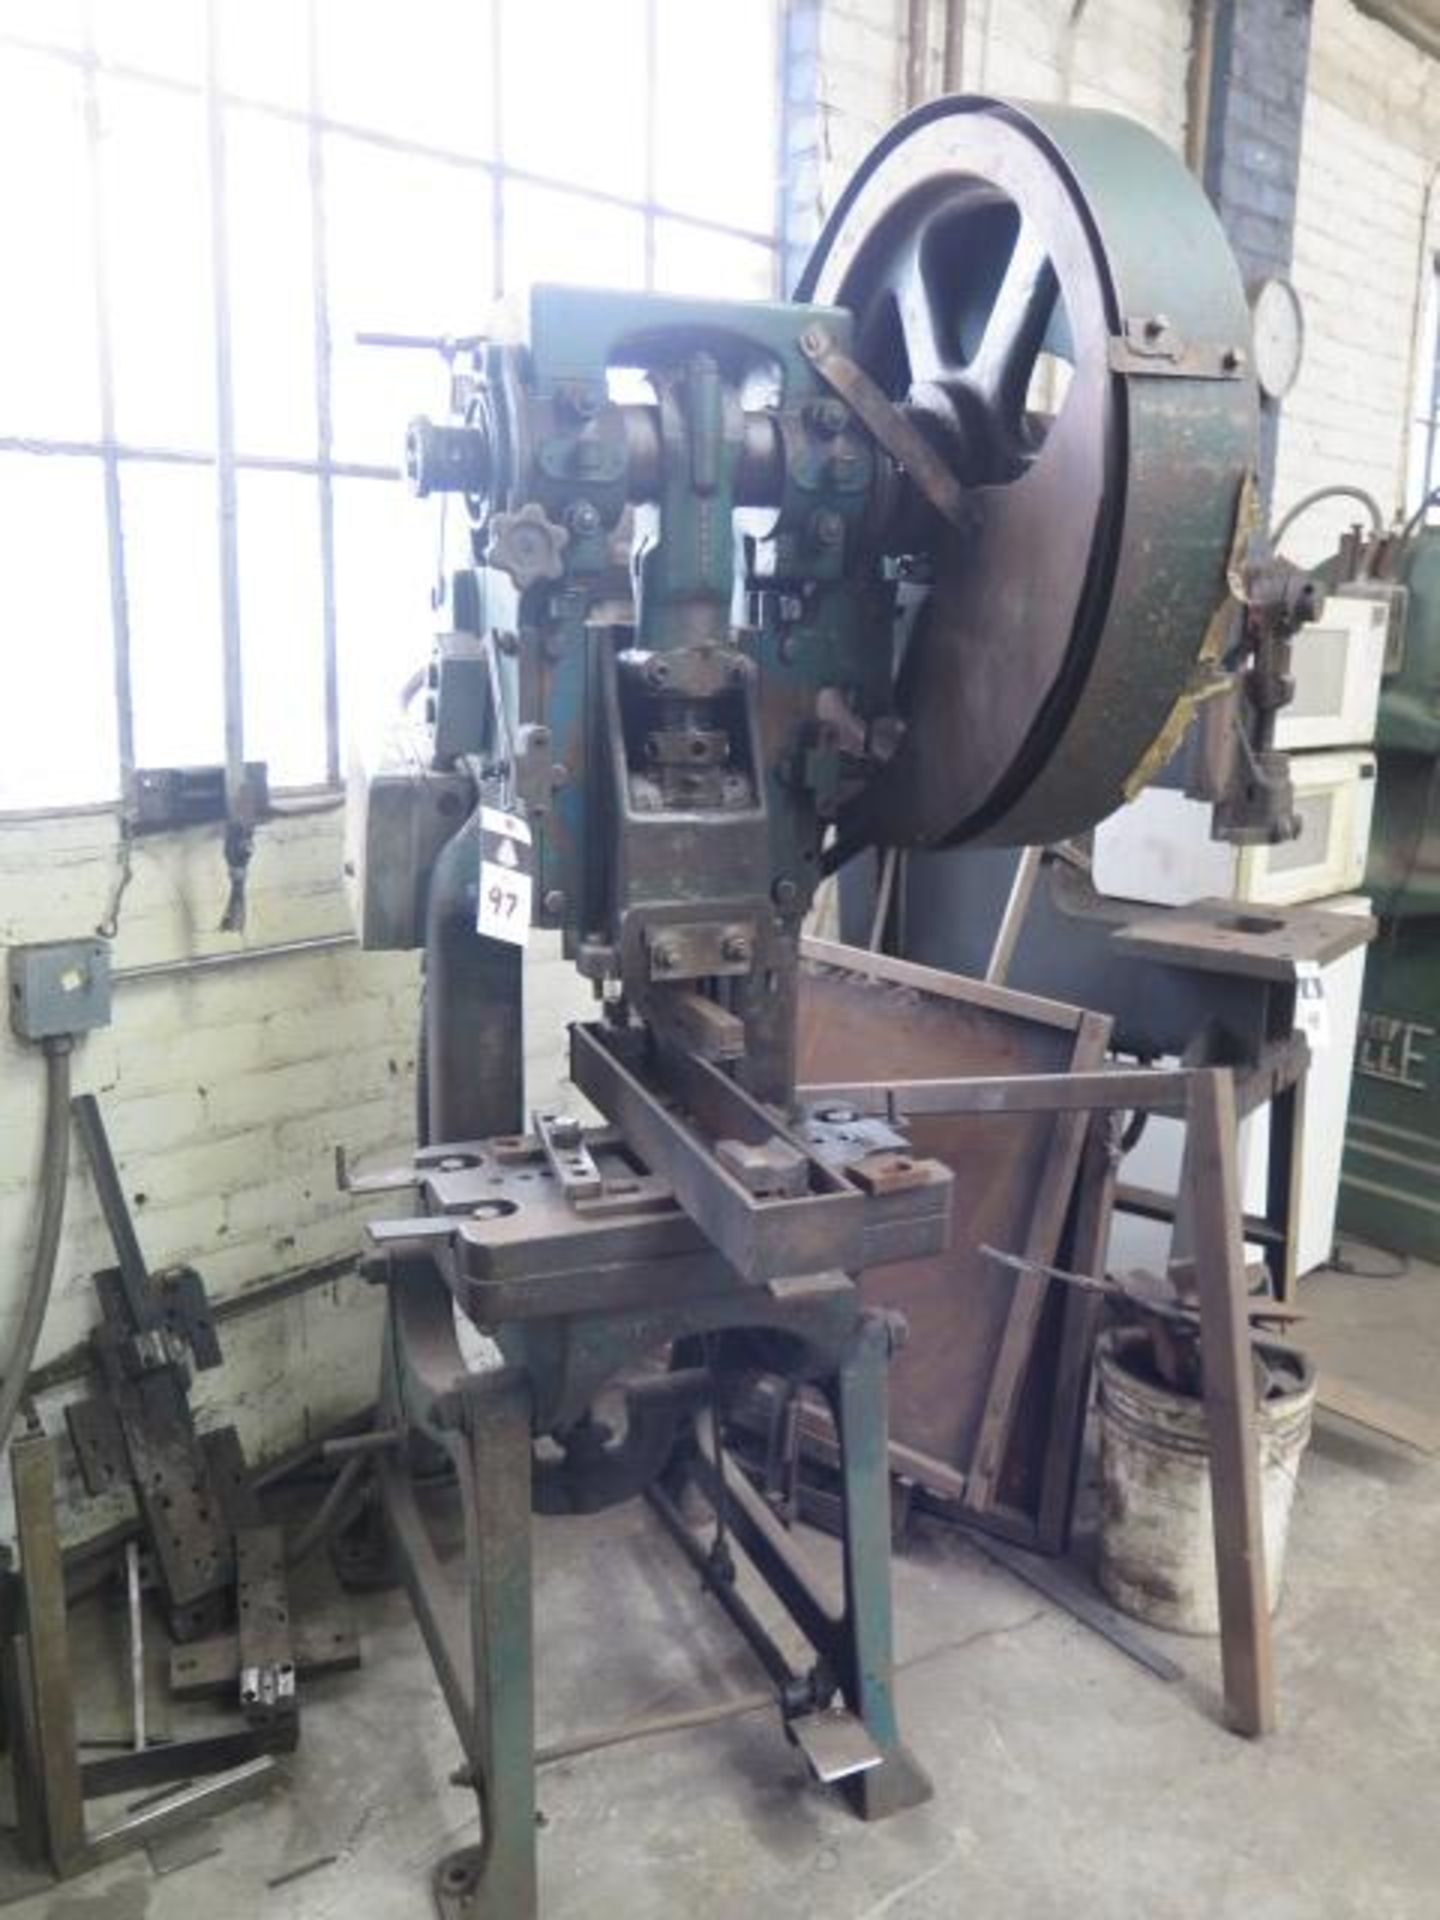 Perkins mdl.351B 20-Ton OBI Stamping Press (FOR PARTS ONLY) (SOLD AS-IS - NO WARRANTY)